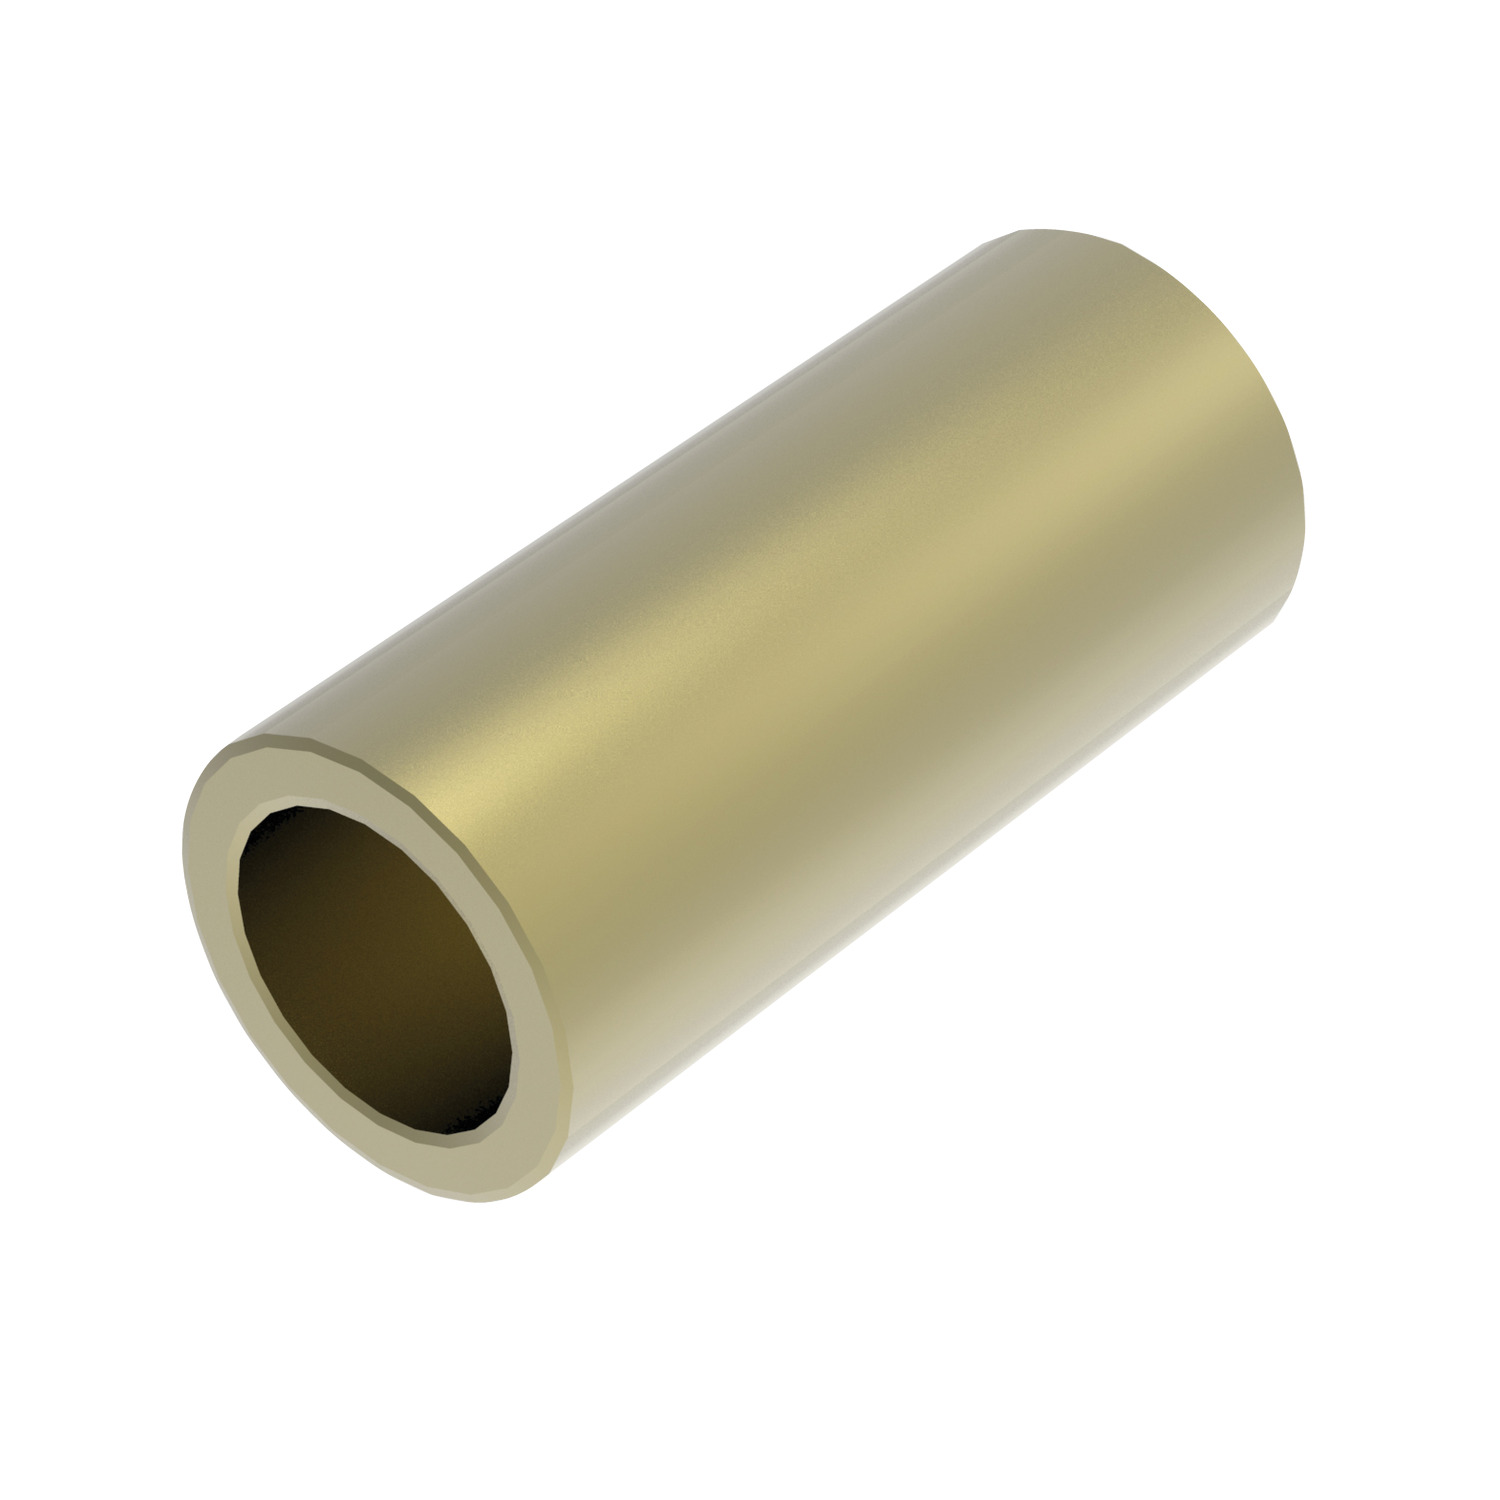 P1330 Cylindrical Spacers - Brass